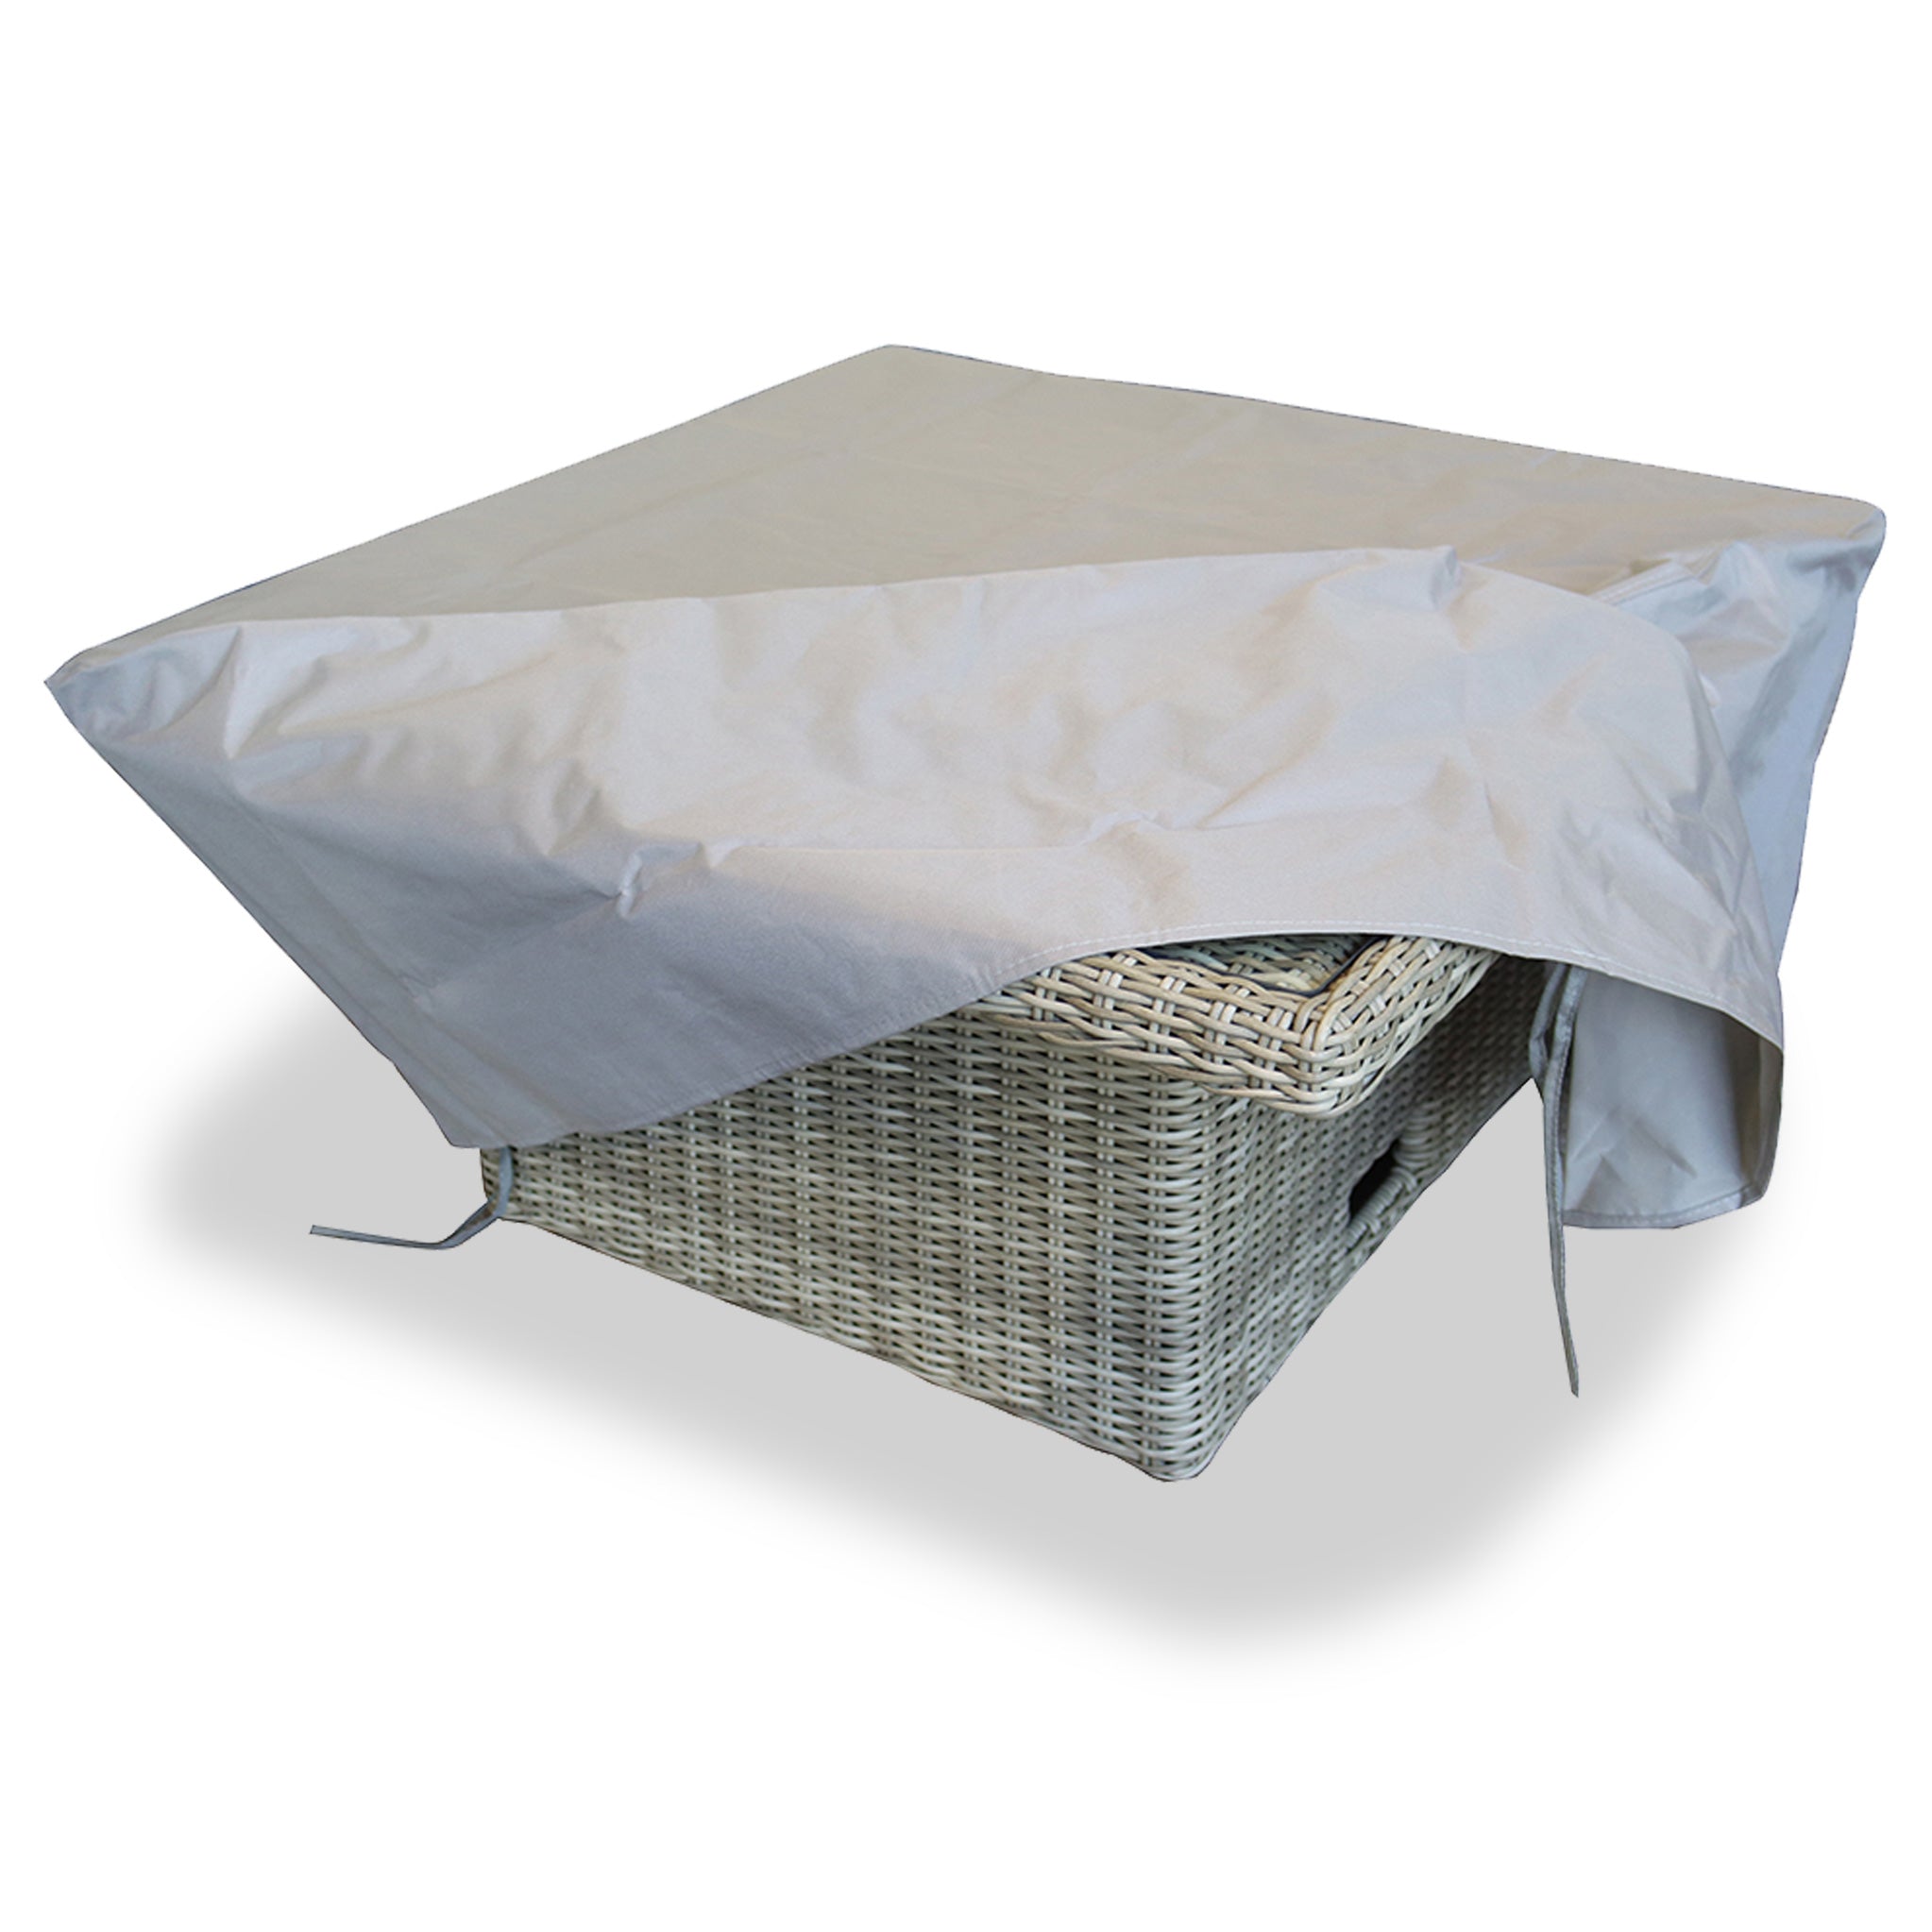 Wentworth Lounge Heavy Duty Waterproof Garden Furniture Table Cover